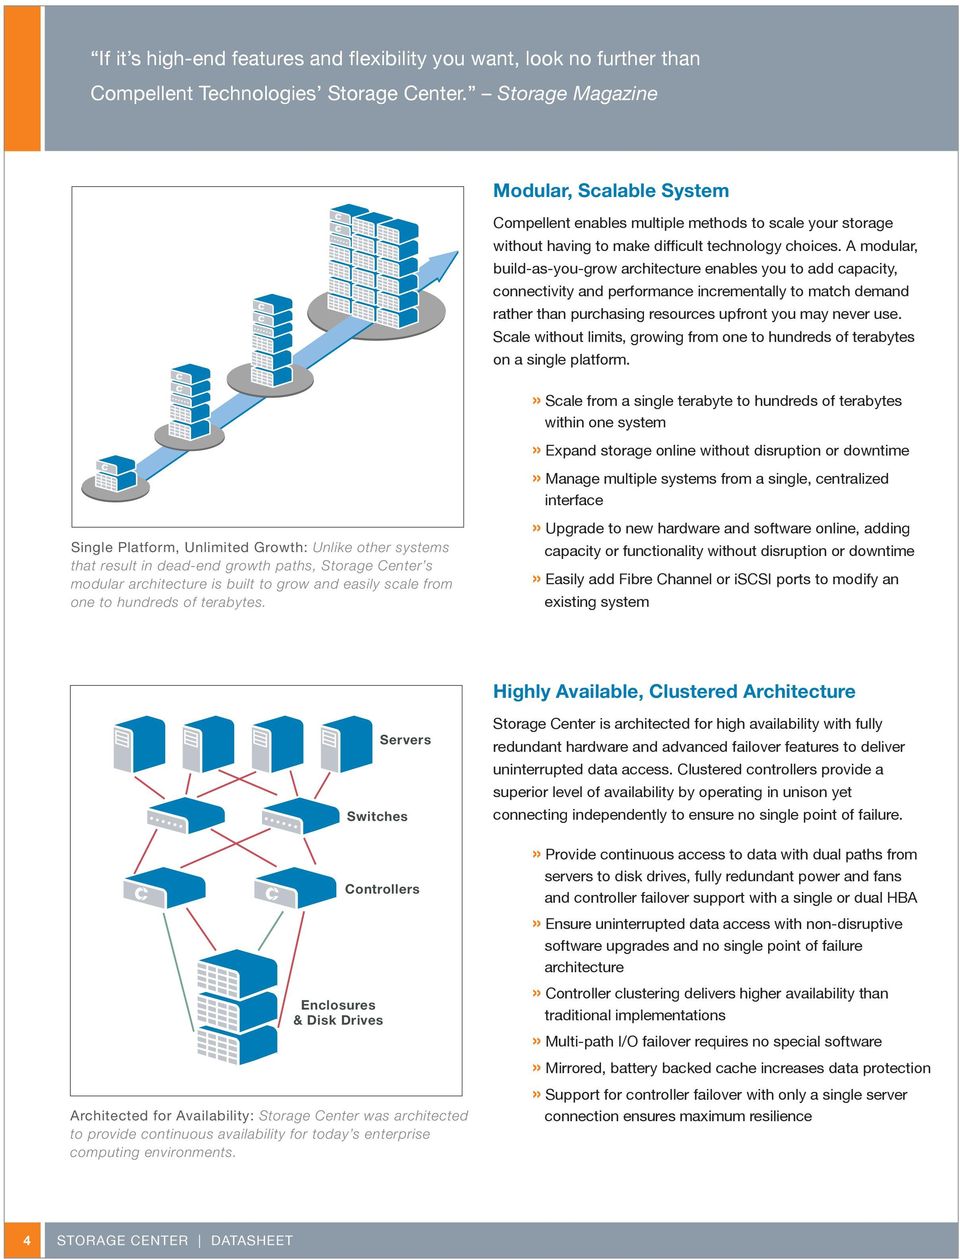 A modular, build-as-you-grow architecture enables you to add capacity, connectivity and performance incrementally to match demand rather than purchasing resources upfront you may never use.